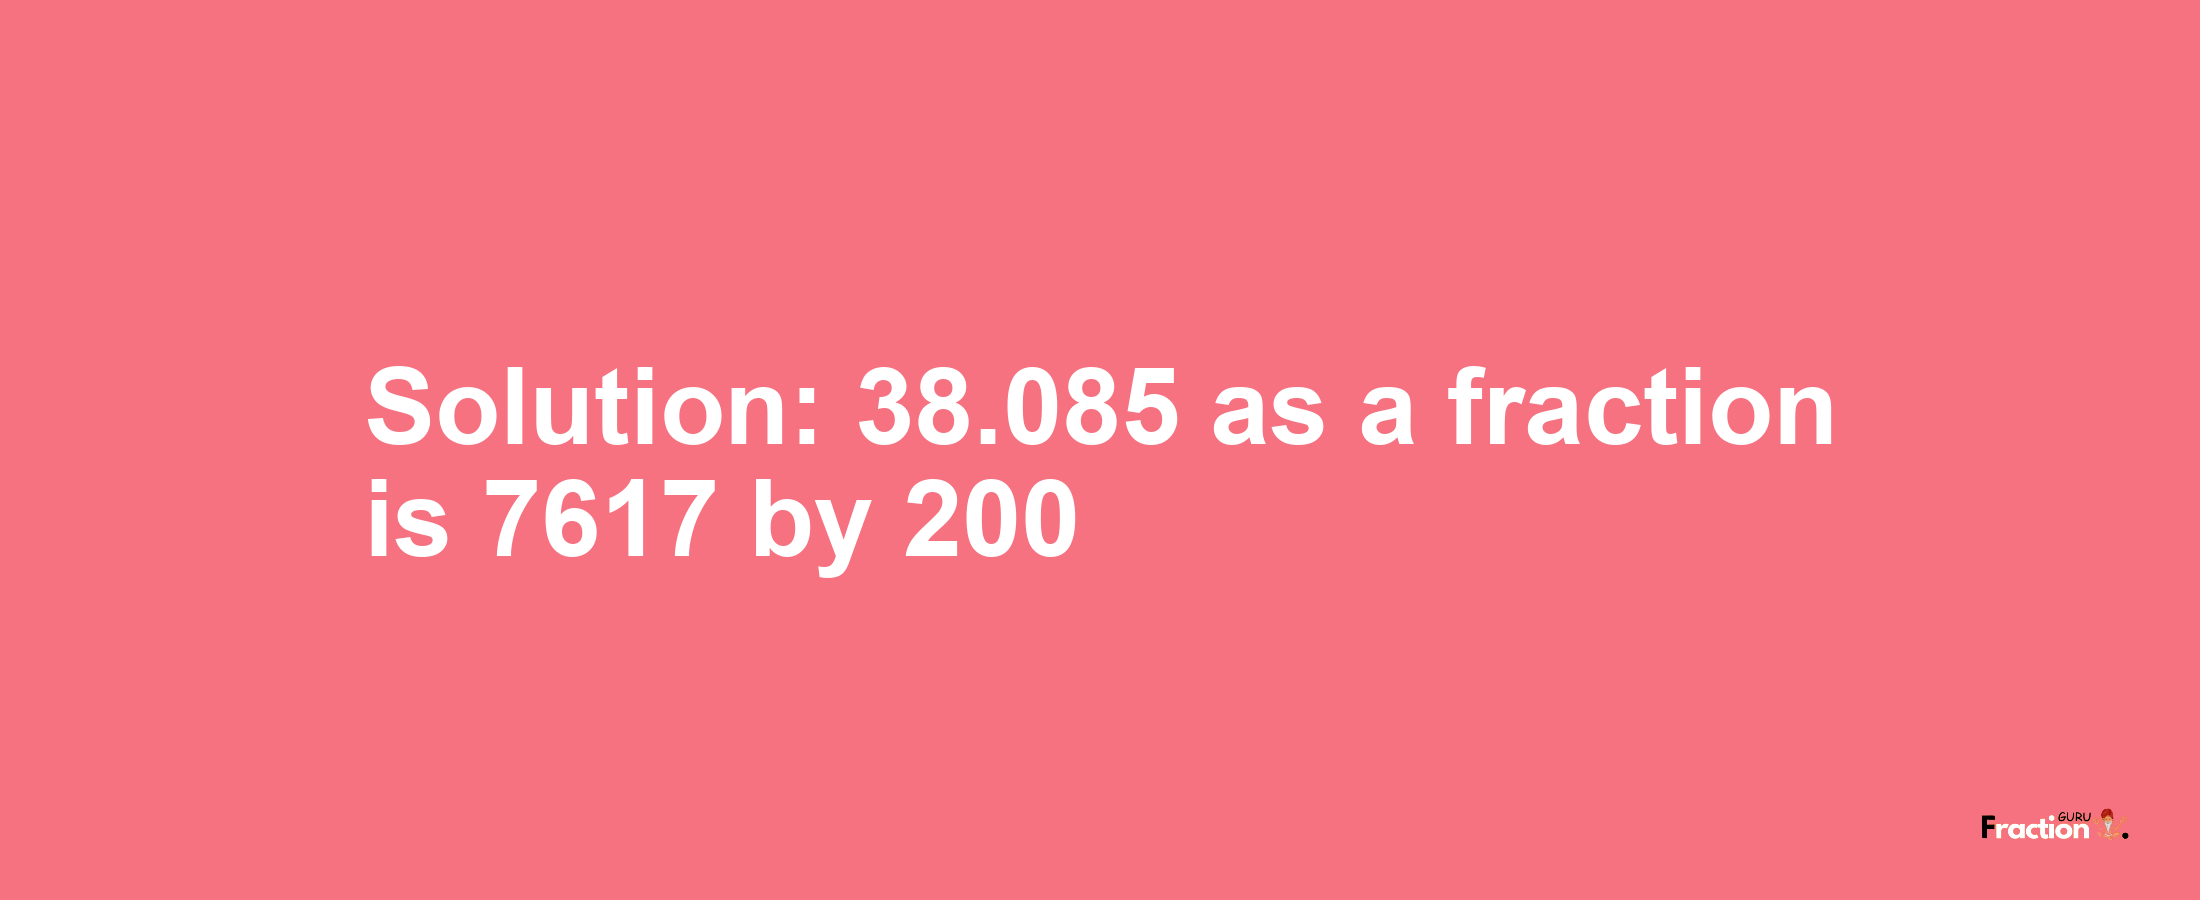 Solution:38.085 as a fraction is 7617/200